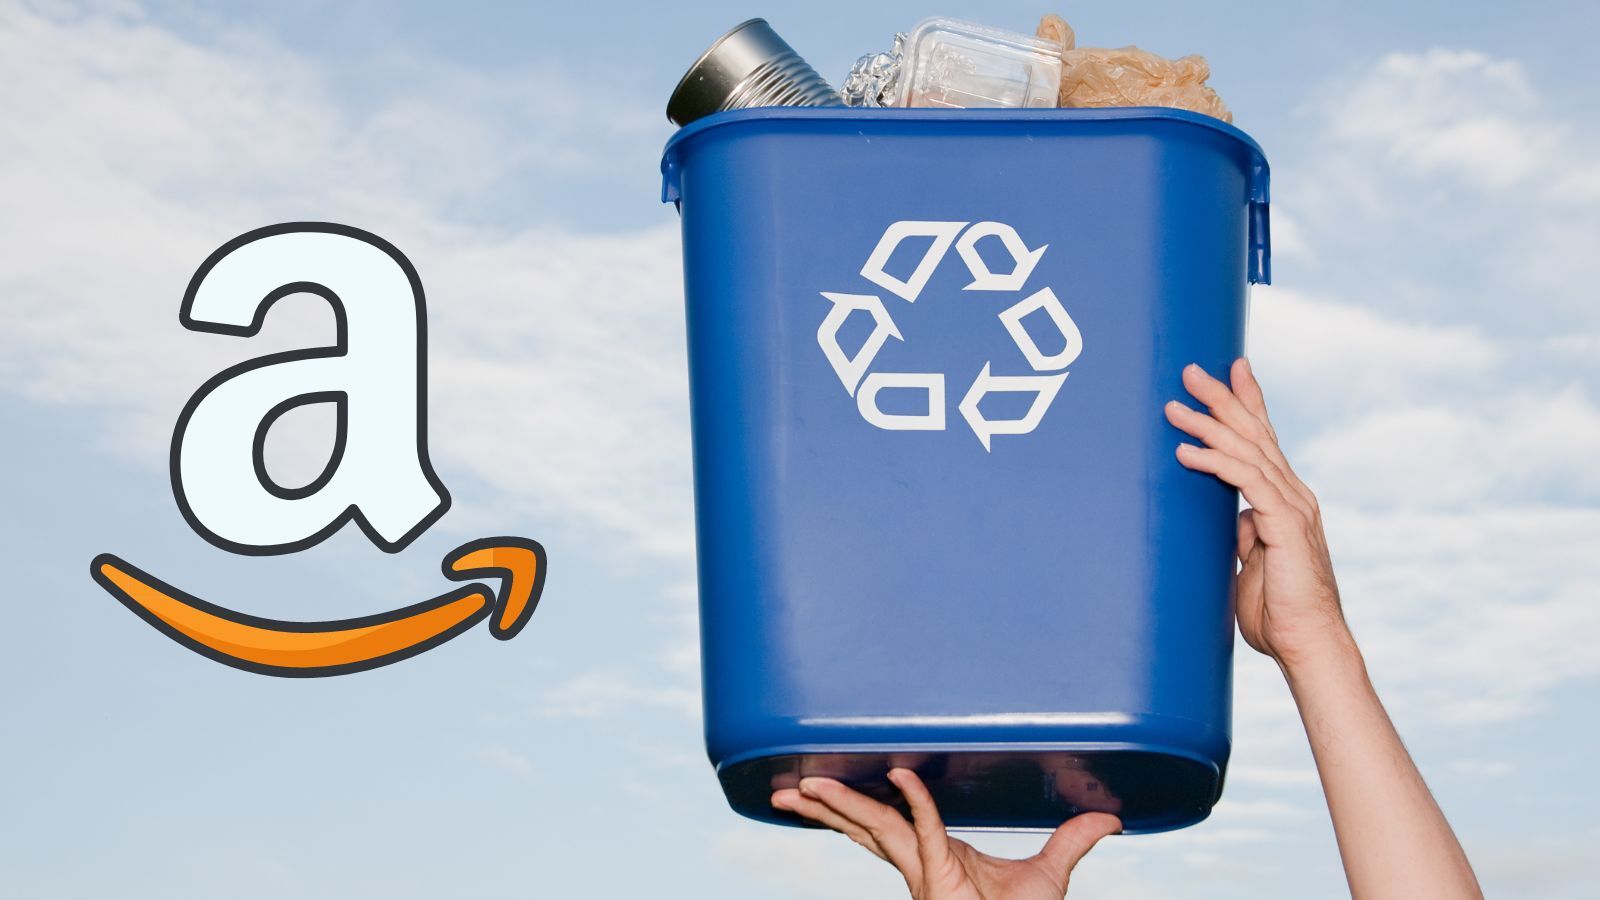 Does Amazon Have a Recycling Program? (Recycle Electronics, Kindle, Batteries...)